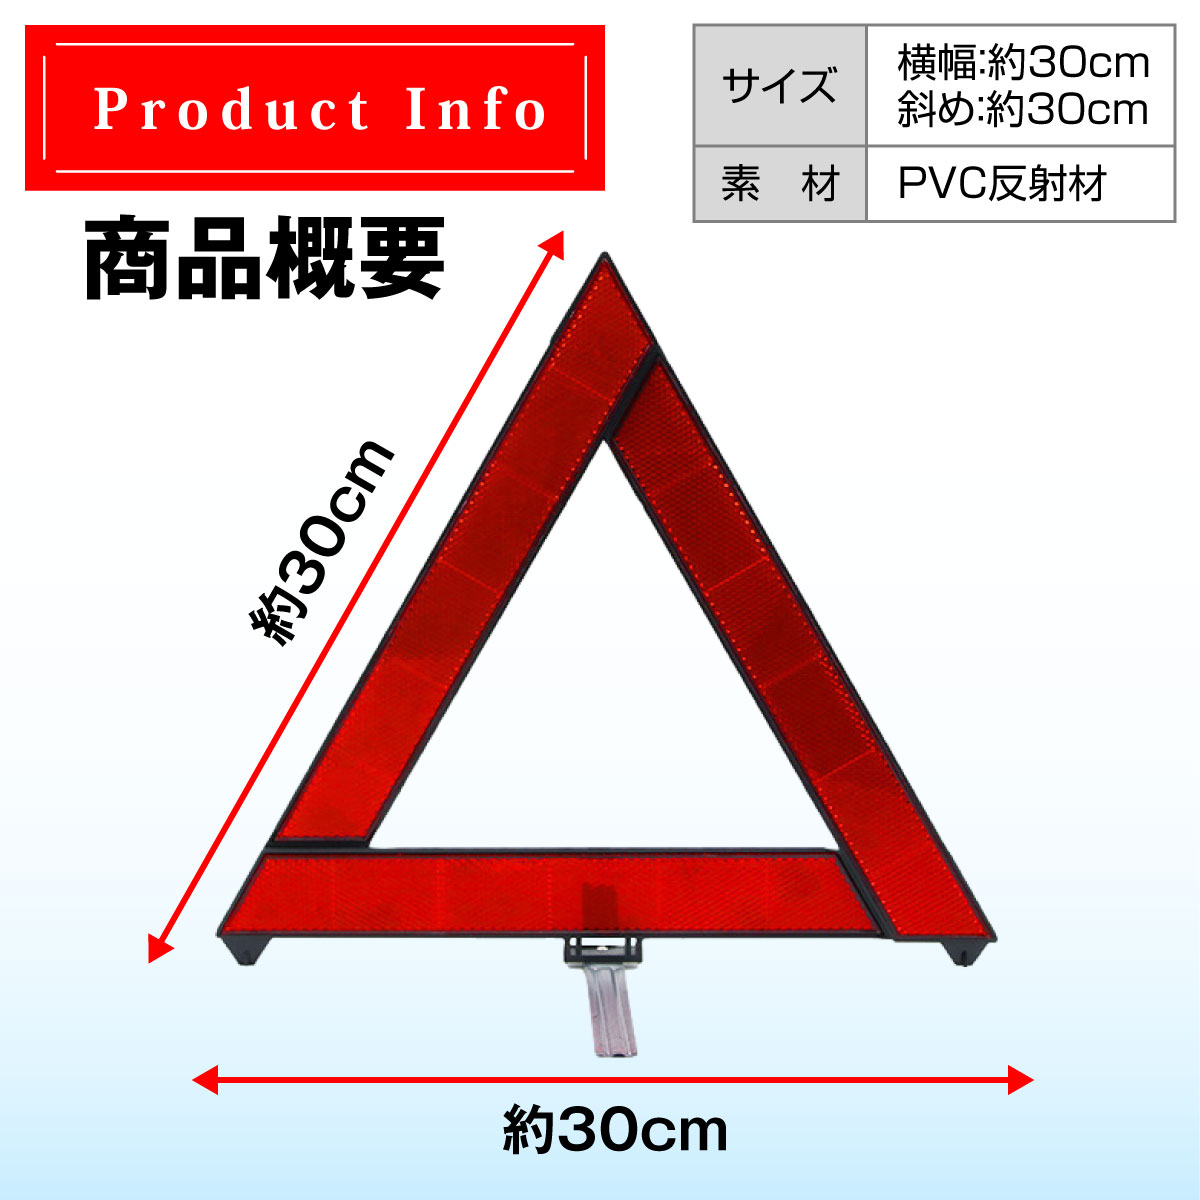  triangular display board reflector folding type compact stop board automobile bike accident prevention . sudden stop nighttime day middle 